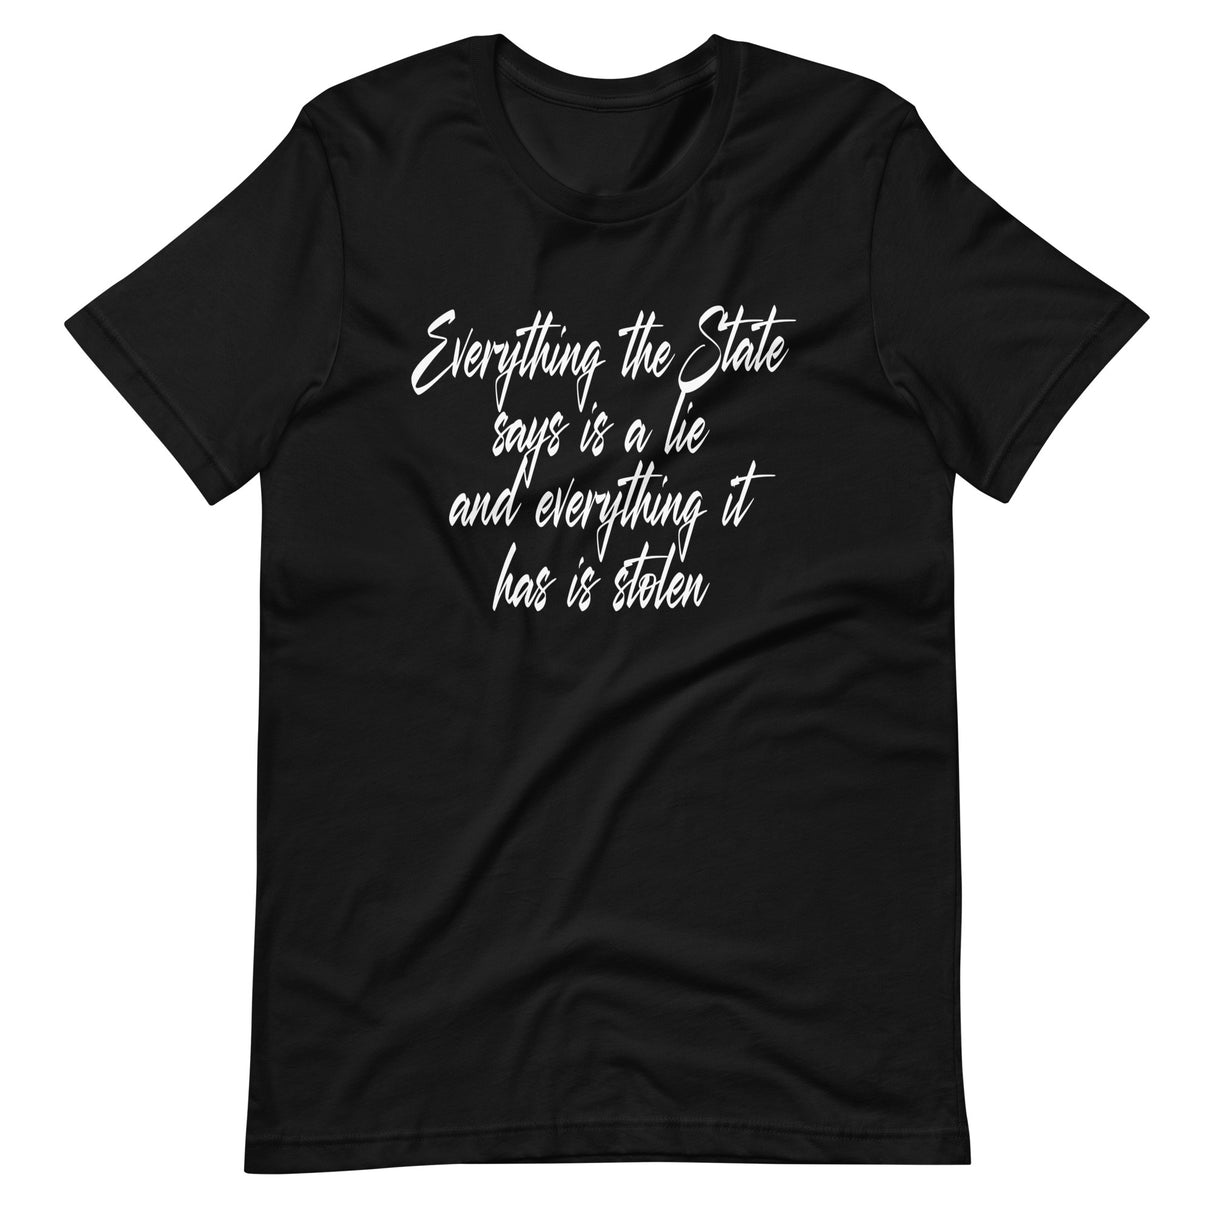 Everything The State Says is a Lie Shirt